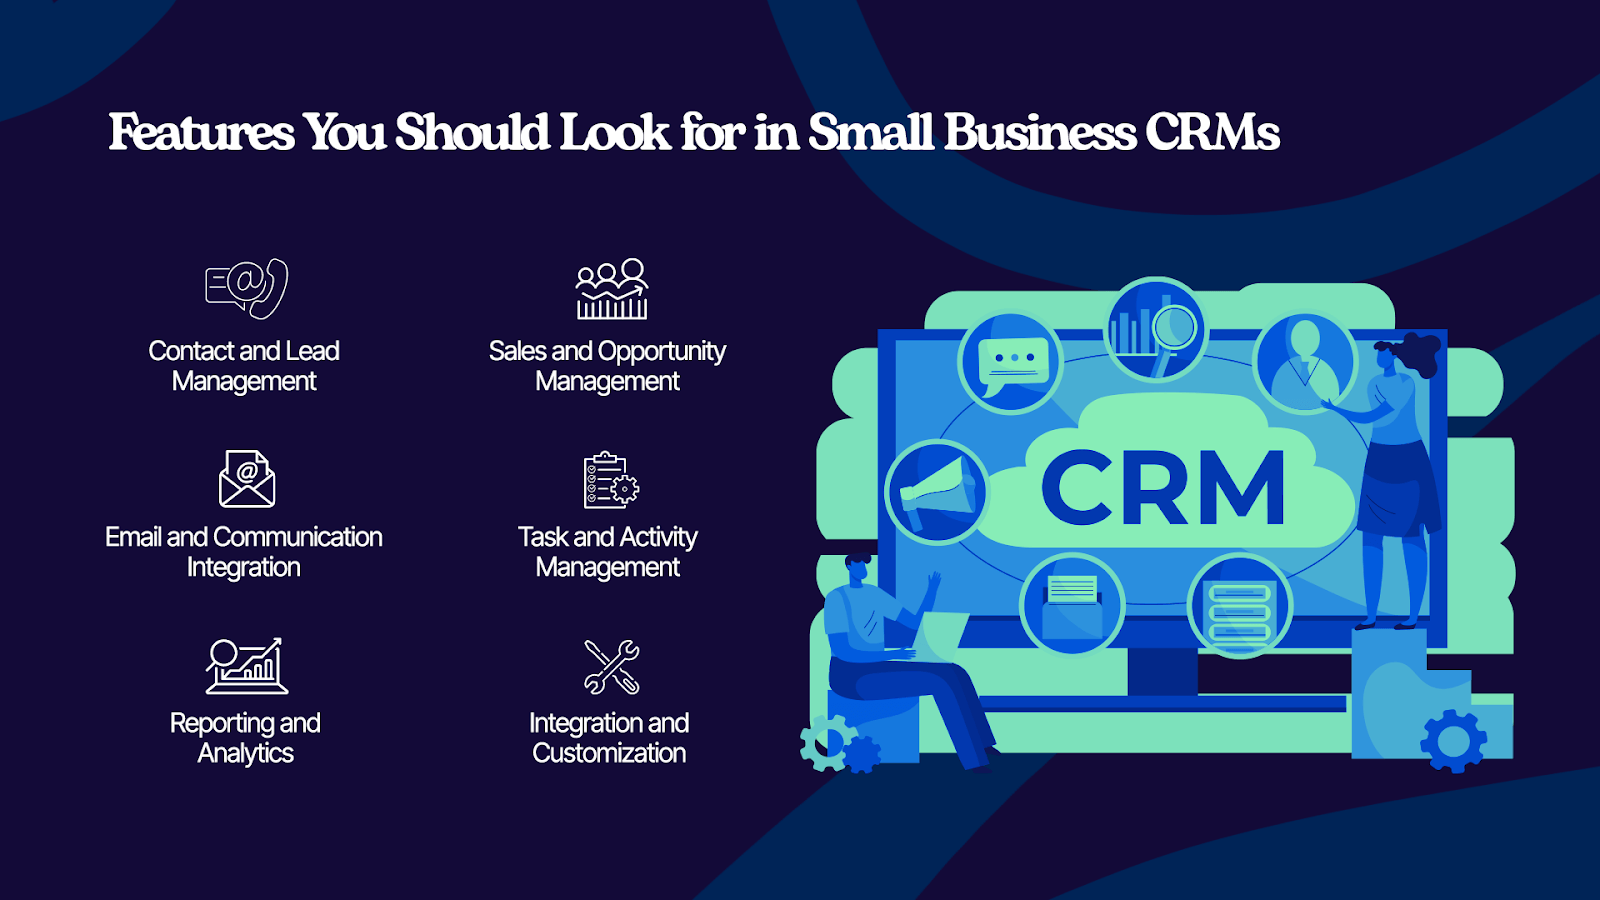 Infographic showing the features you should look for when choosing the best CRM for small business owners.